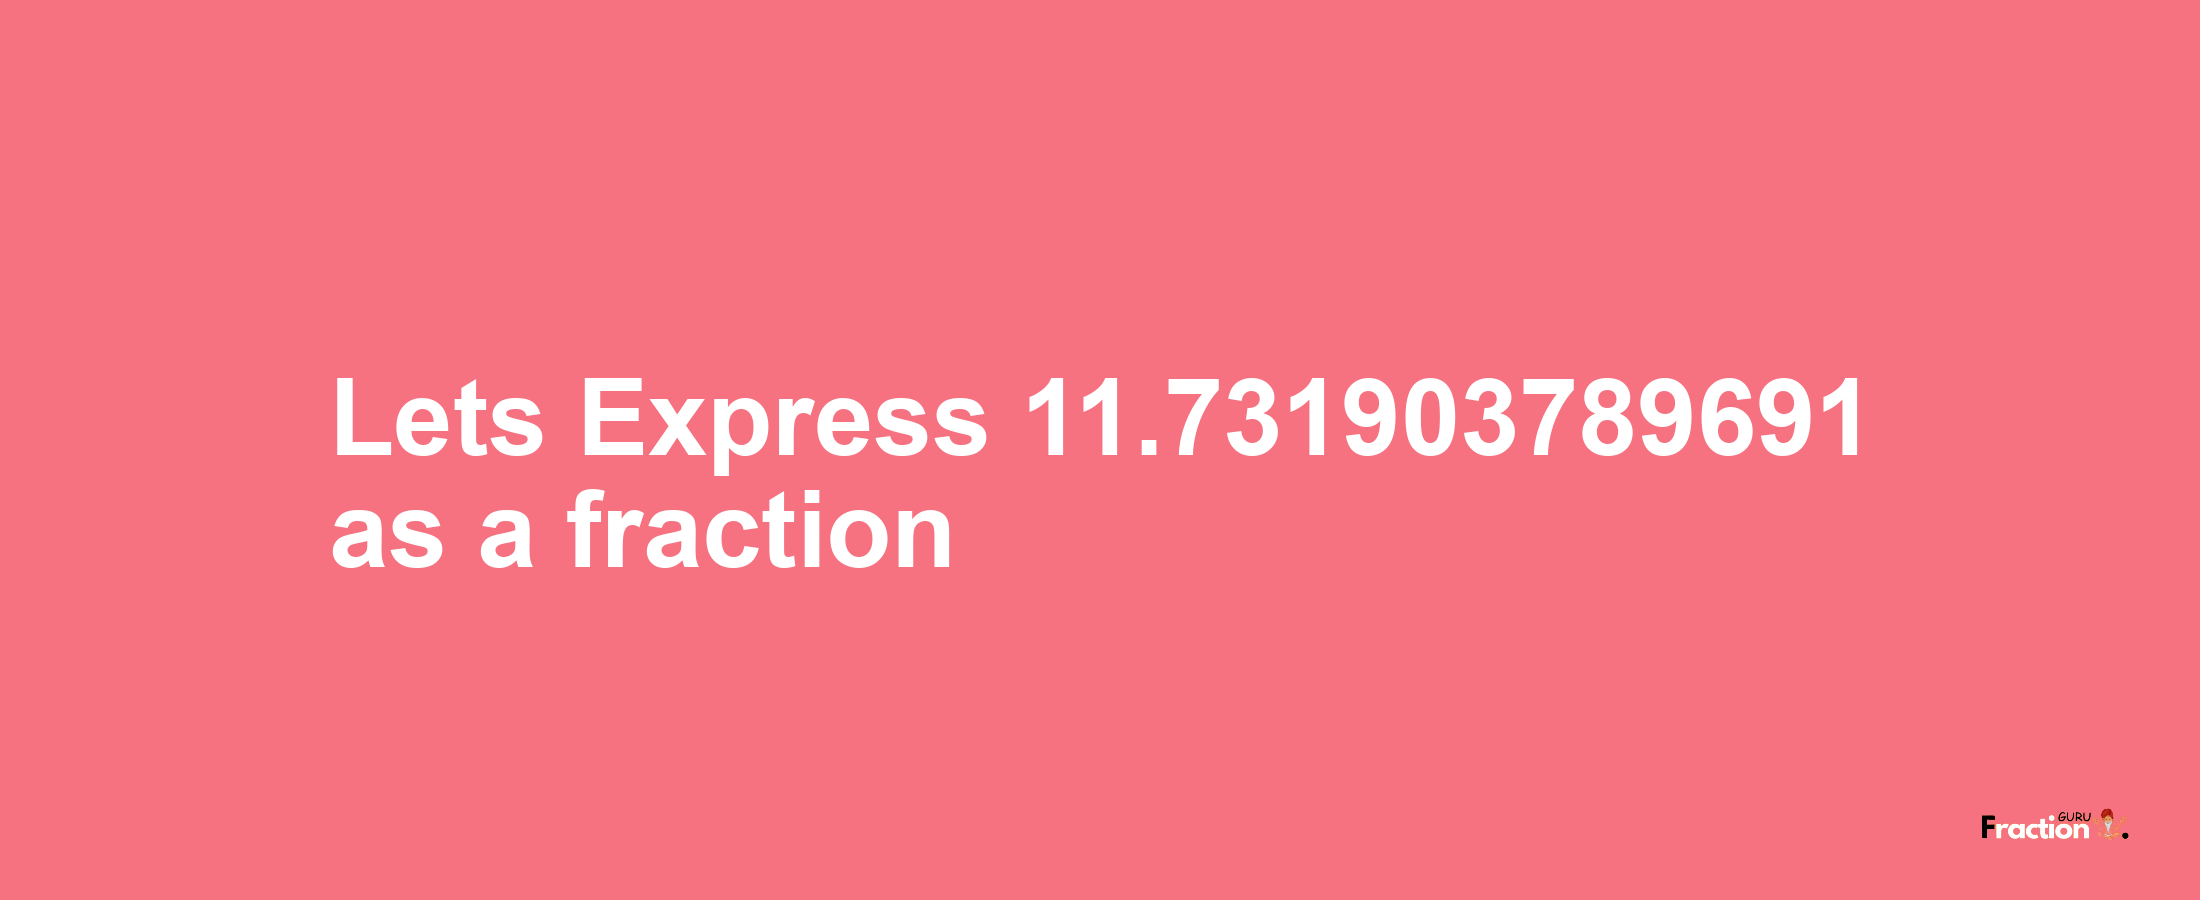 Lets Express 11.731903789691 as afraction